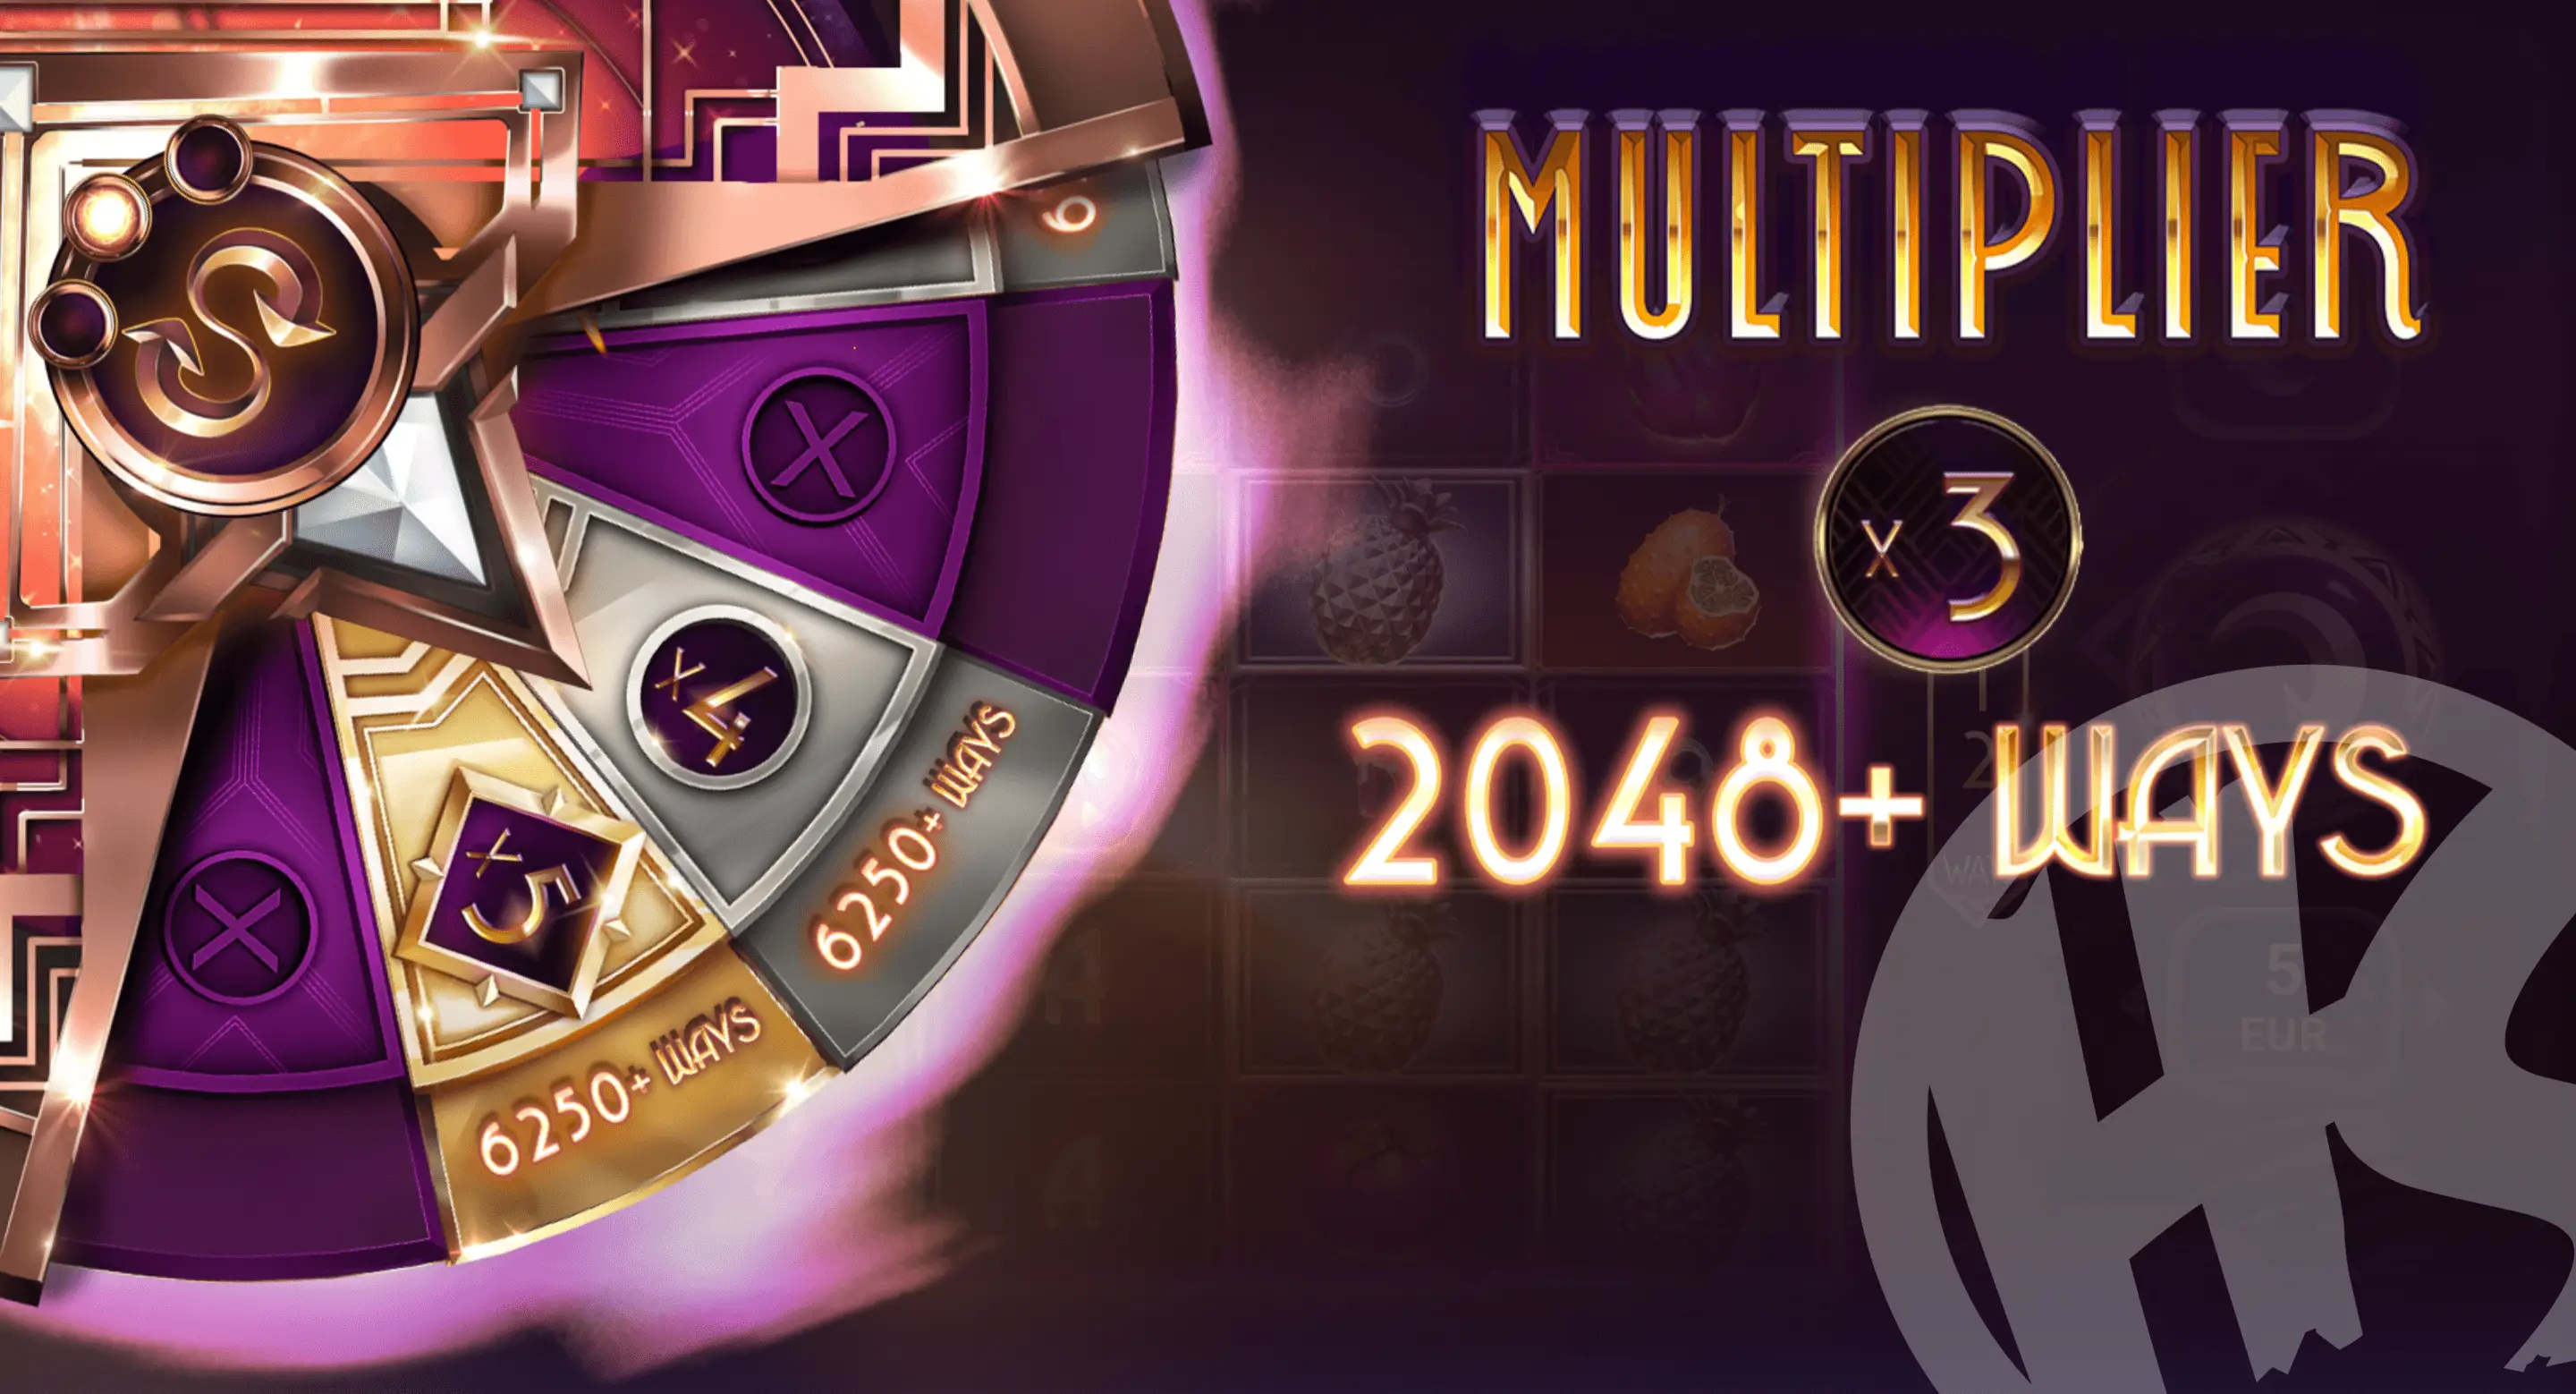 Players Can Gamble Up To 6,250 Ways & x5 Multiplier